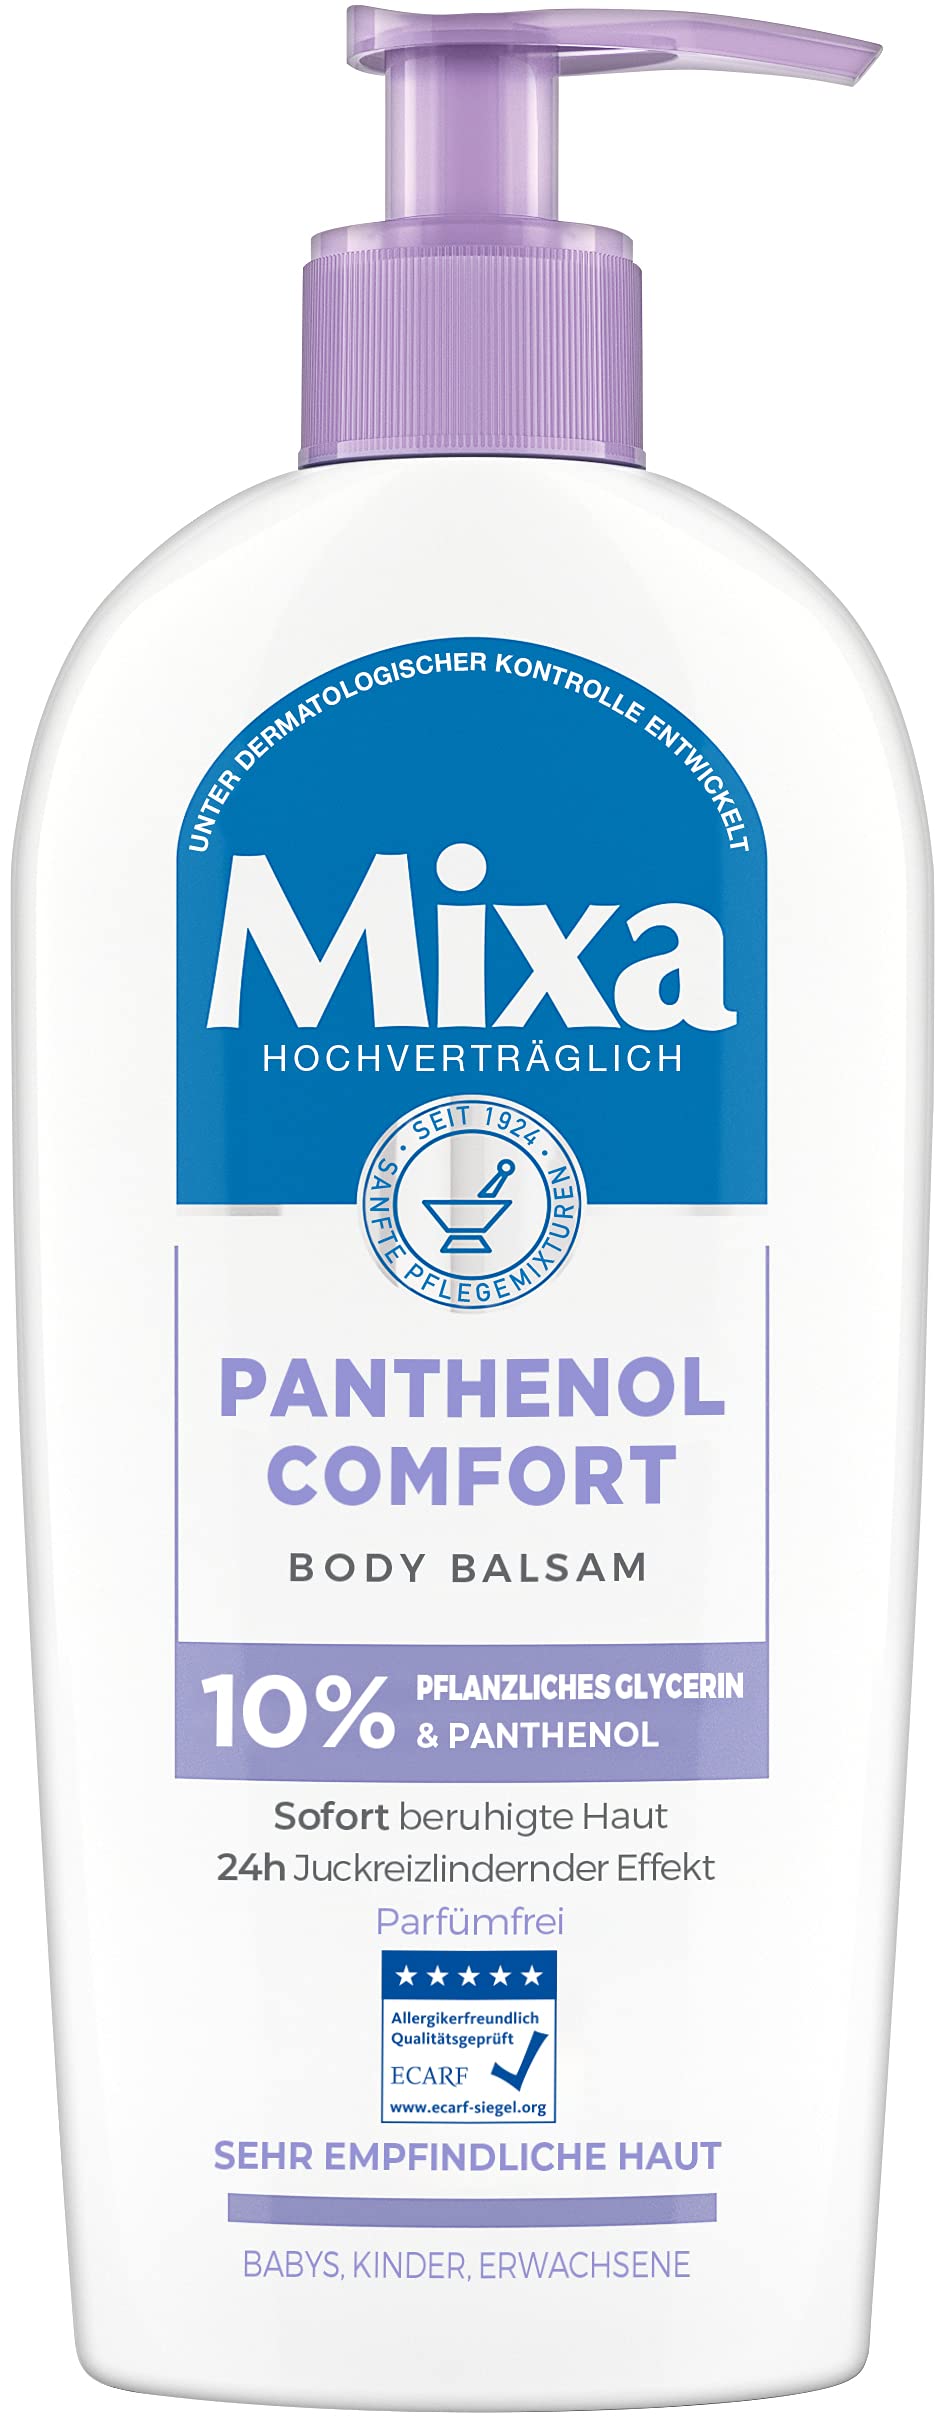 Mua Mixa Panthenol Comfort Body Balm - Itch-Relieving and Soothing